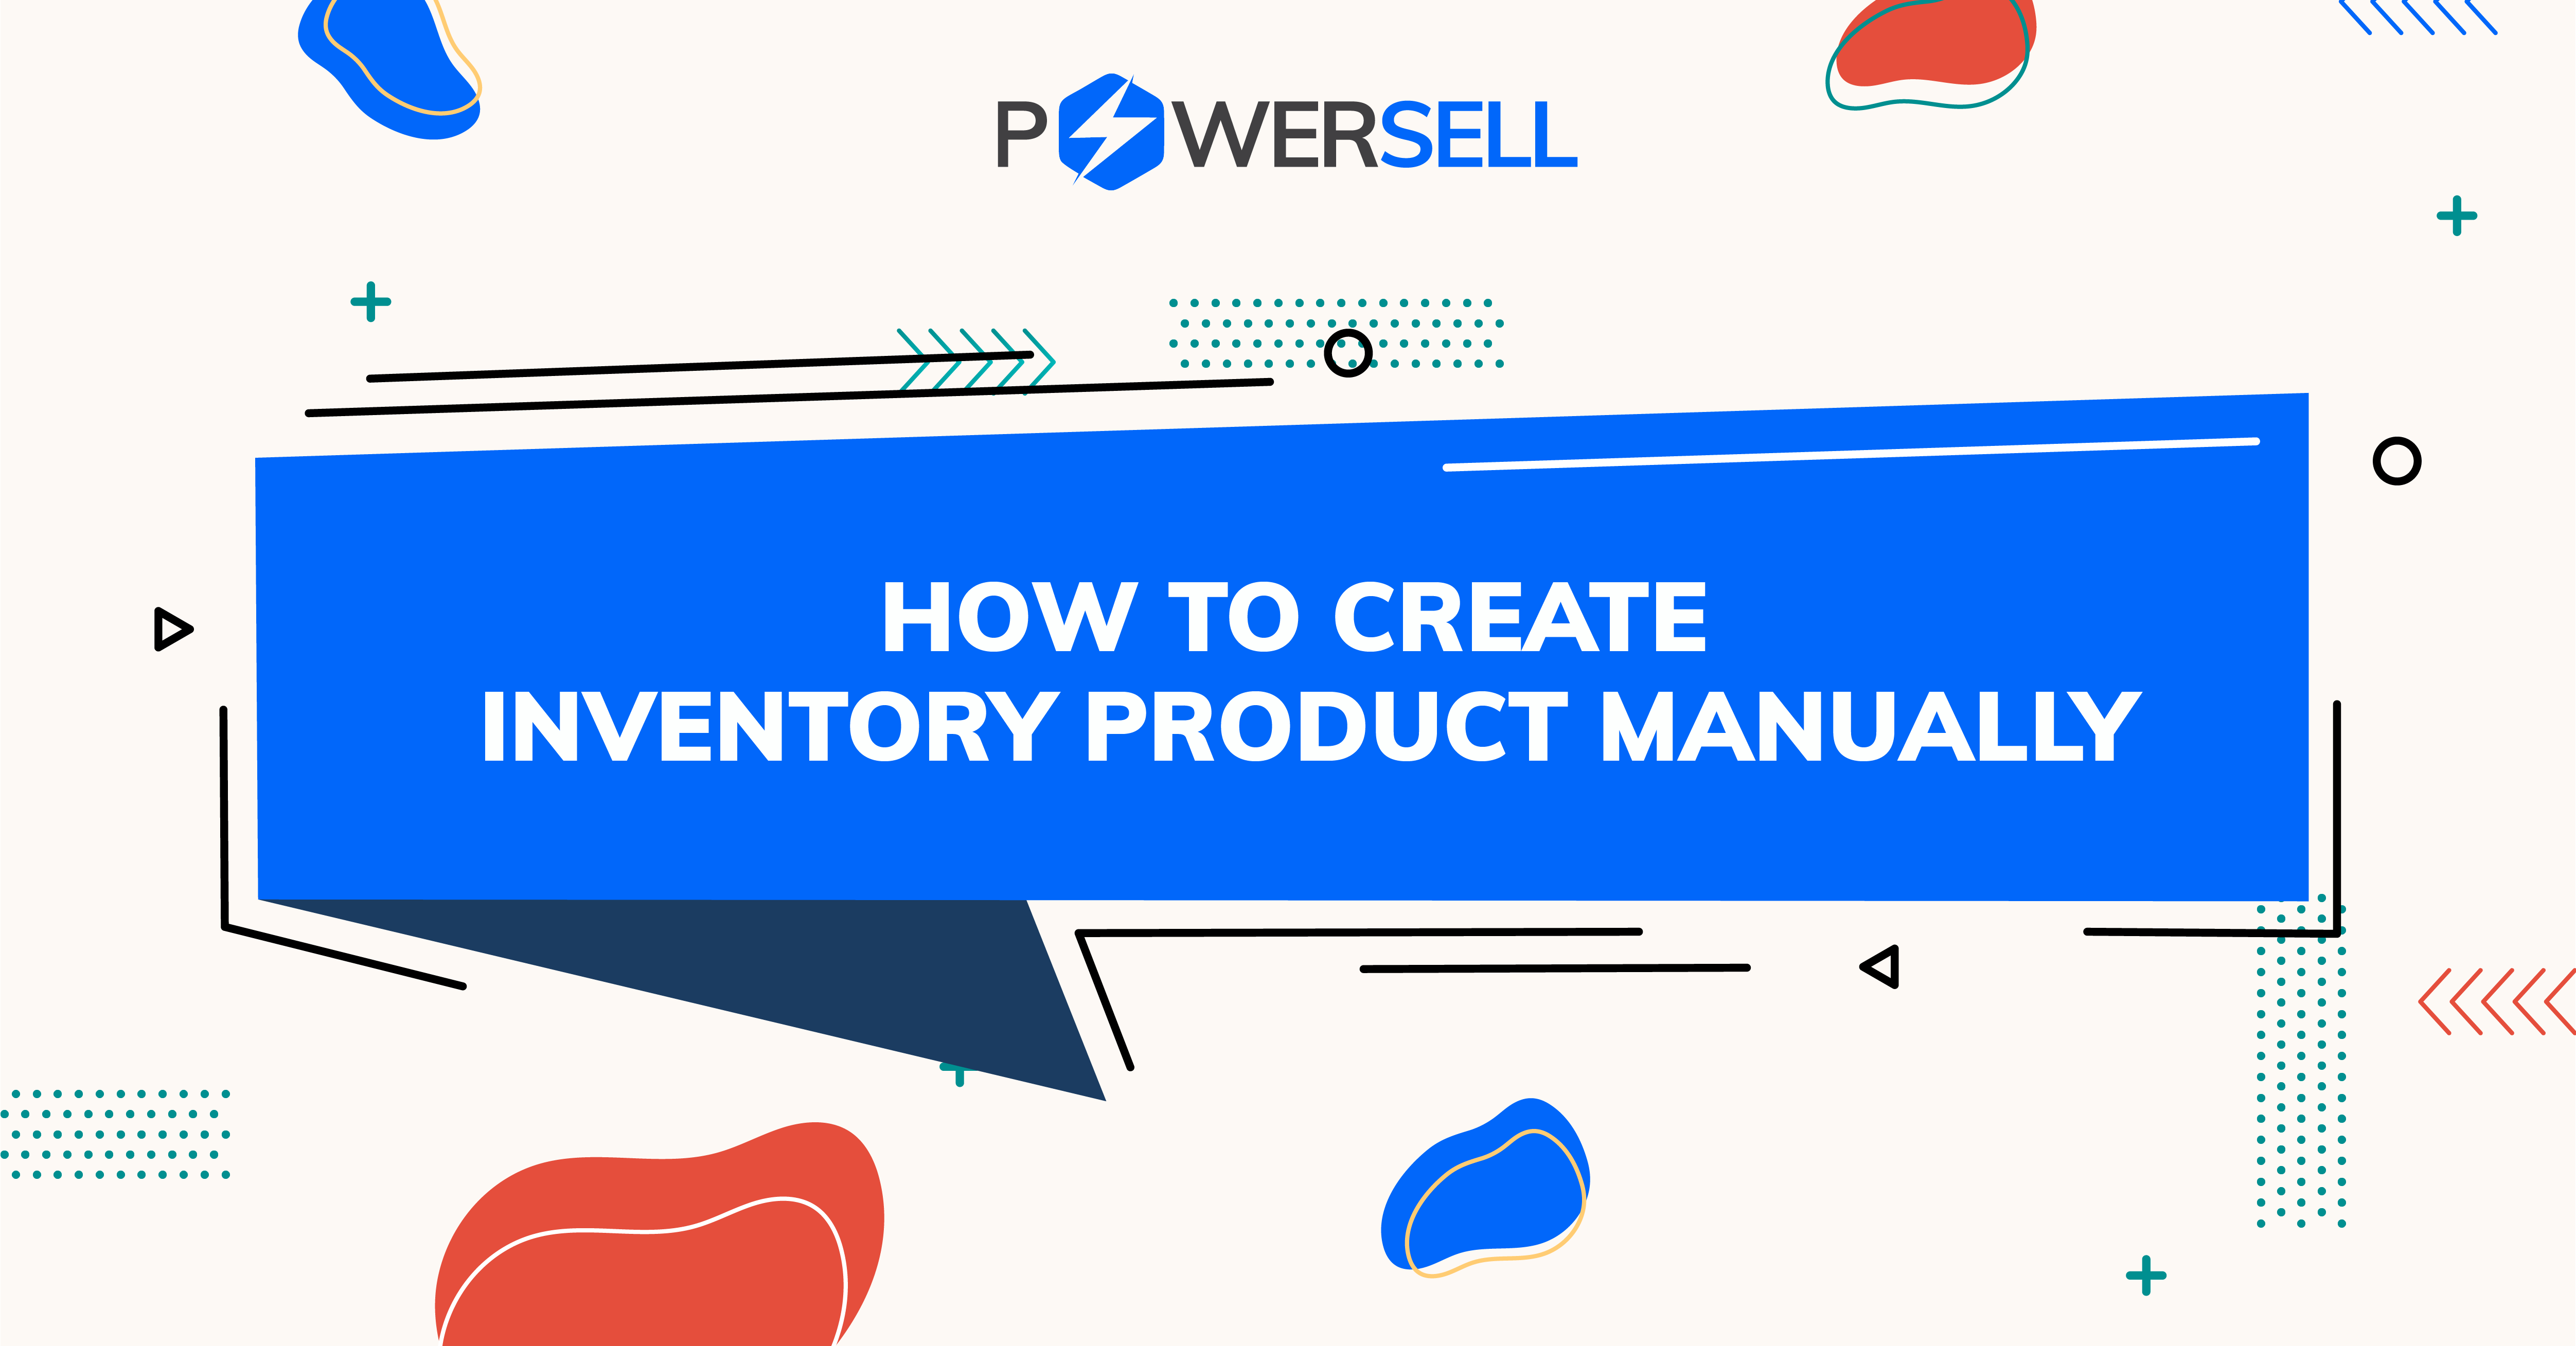 HOW TO CREATE INVENTORY PRODUCT MANUALLY